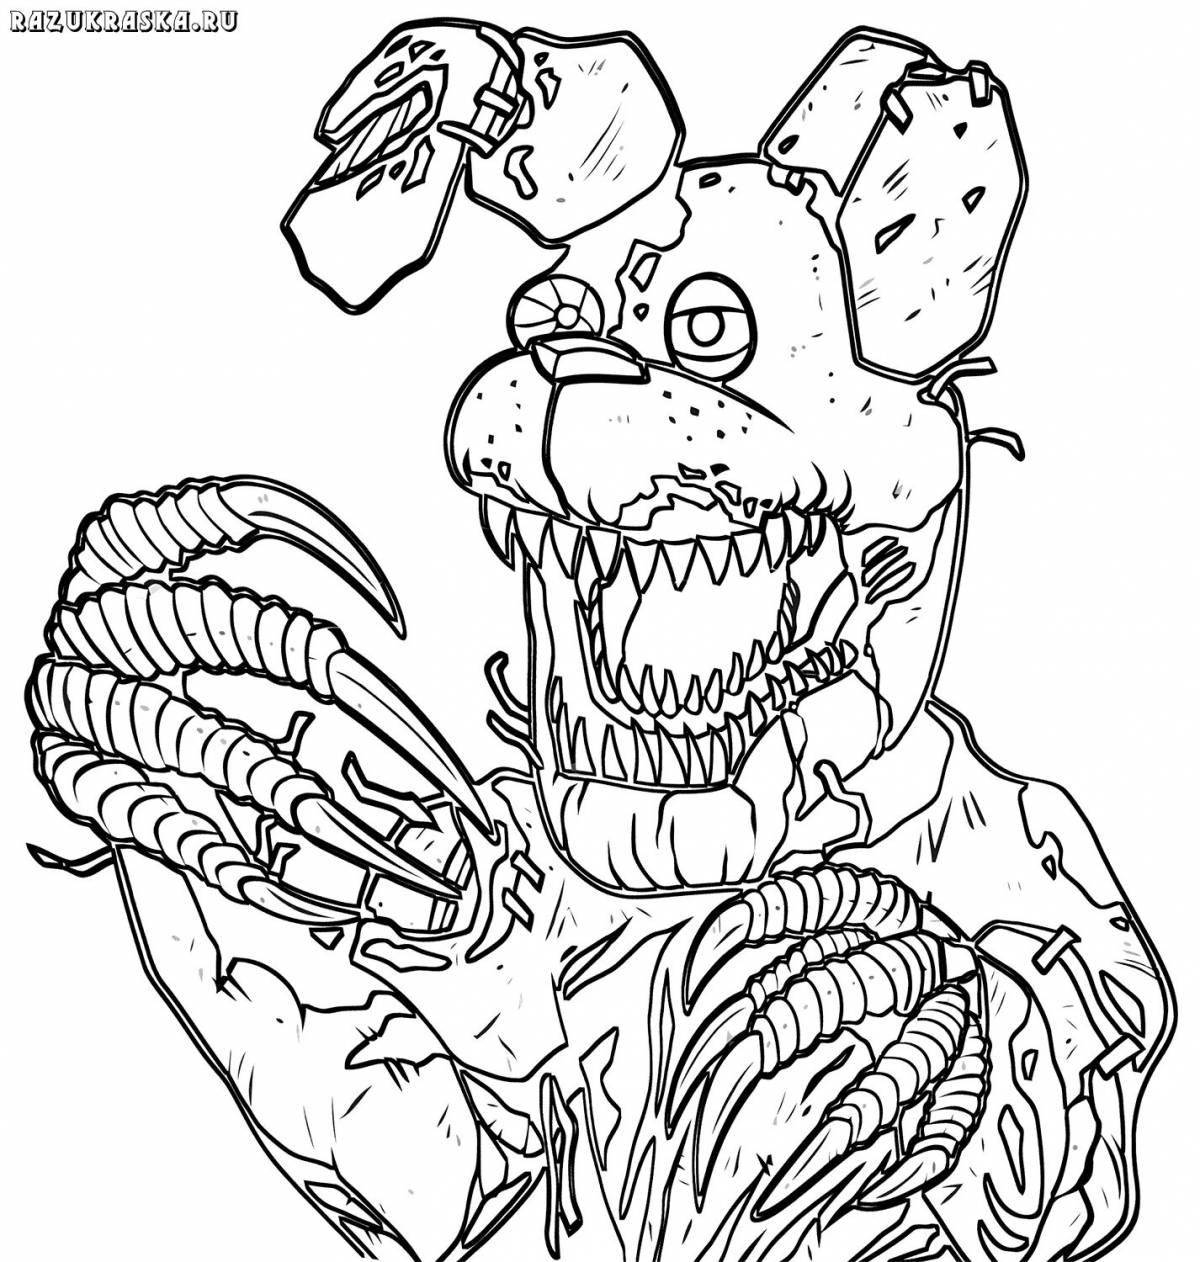 Playful fnf mod coloring page